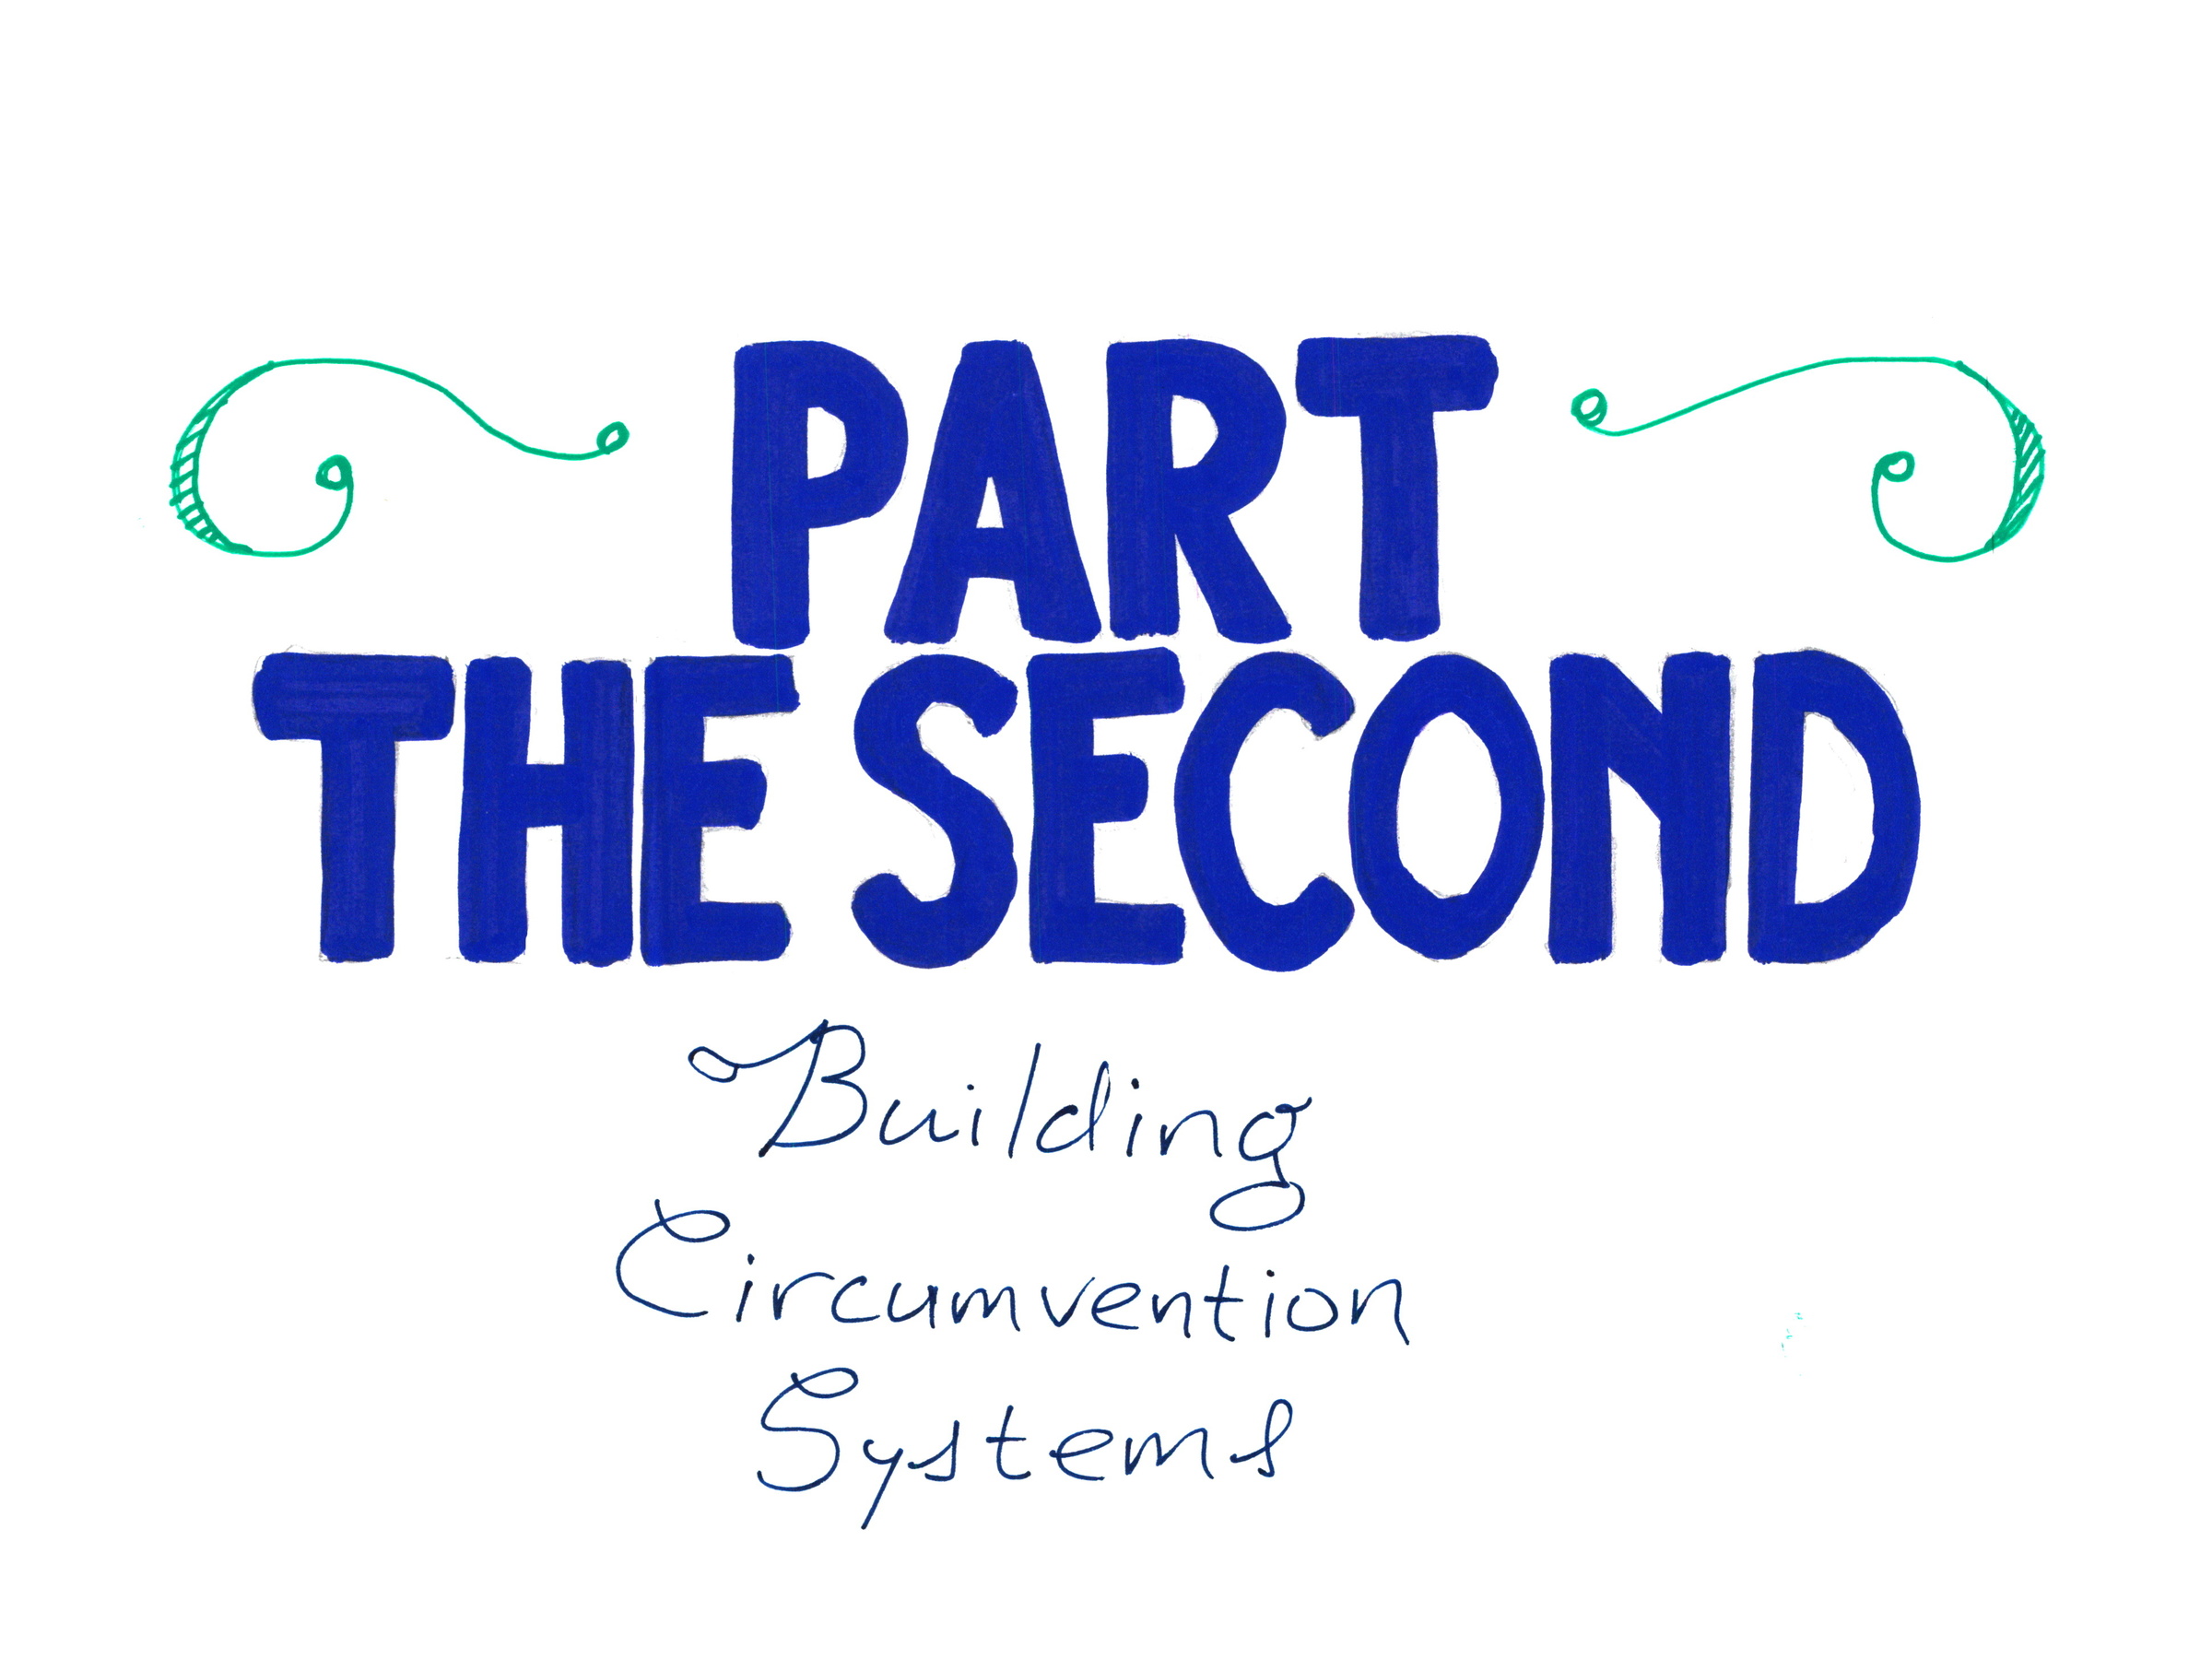 
PART THE SECOND
Building Circumvention Systems
